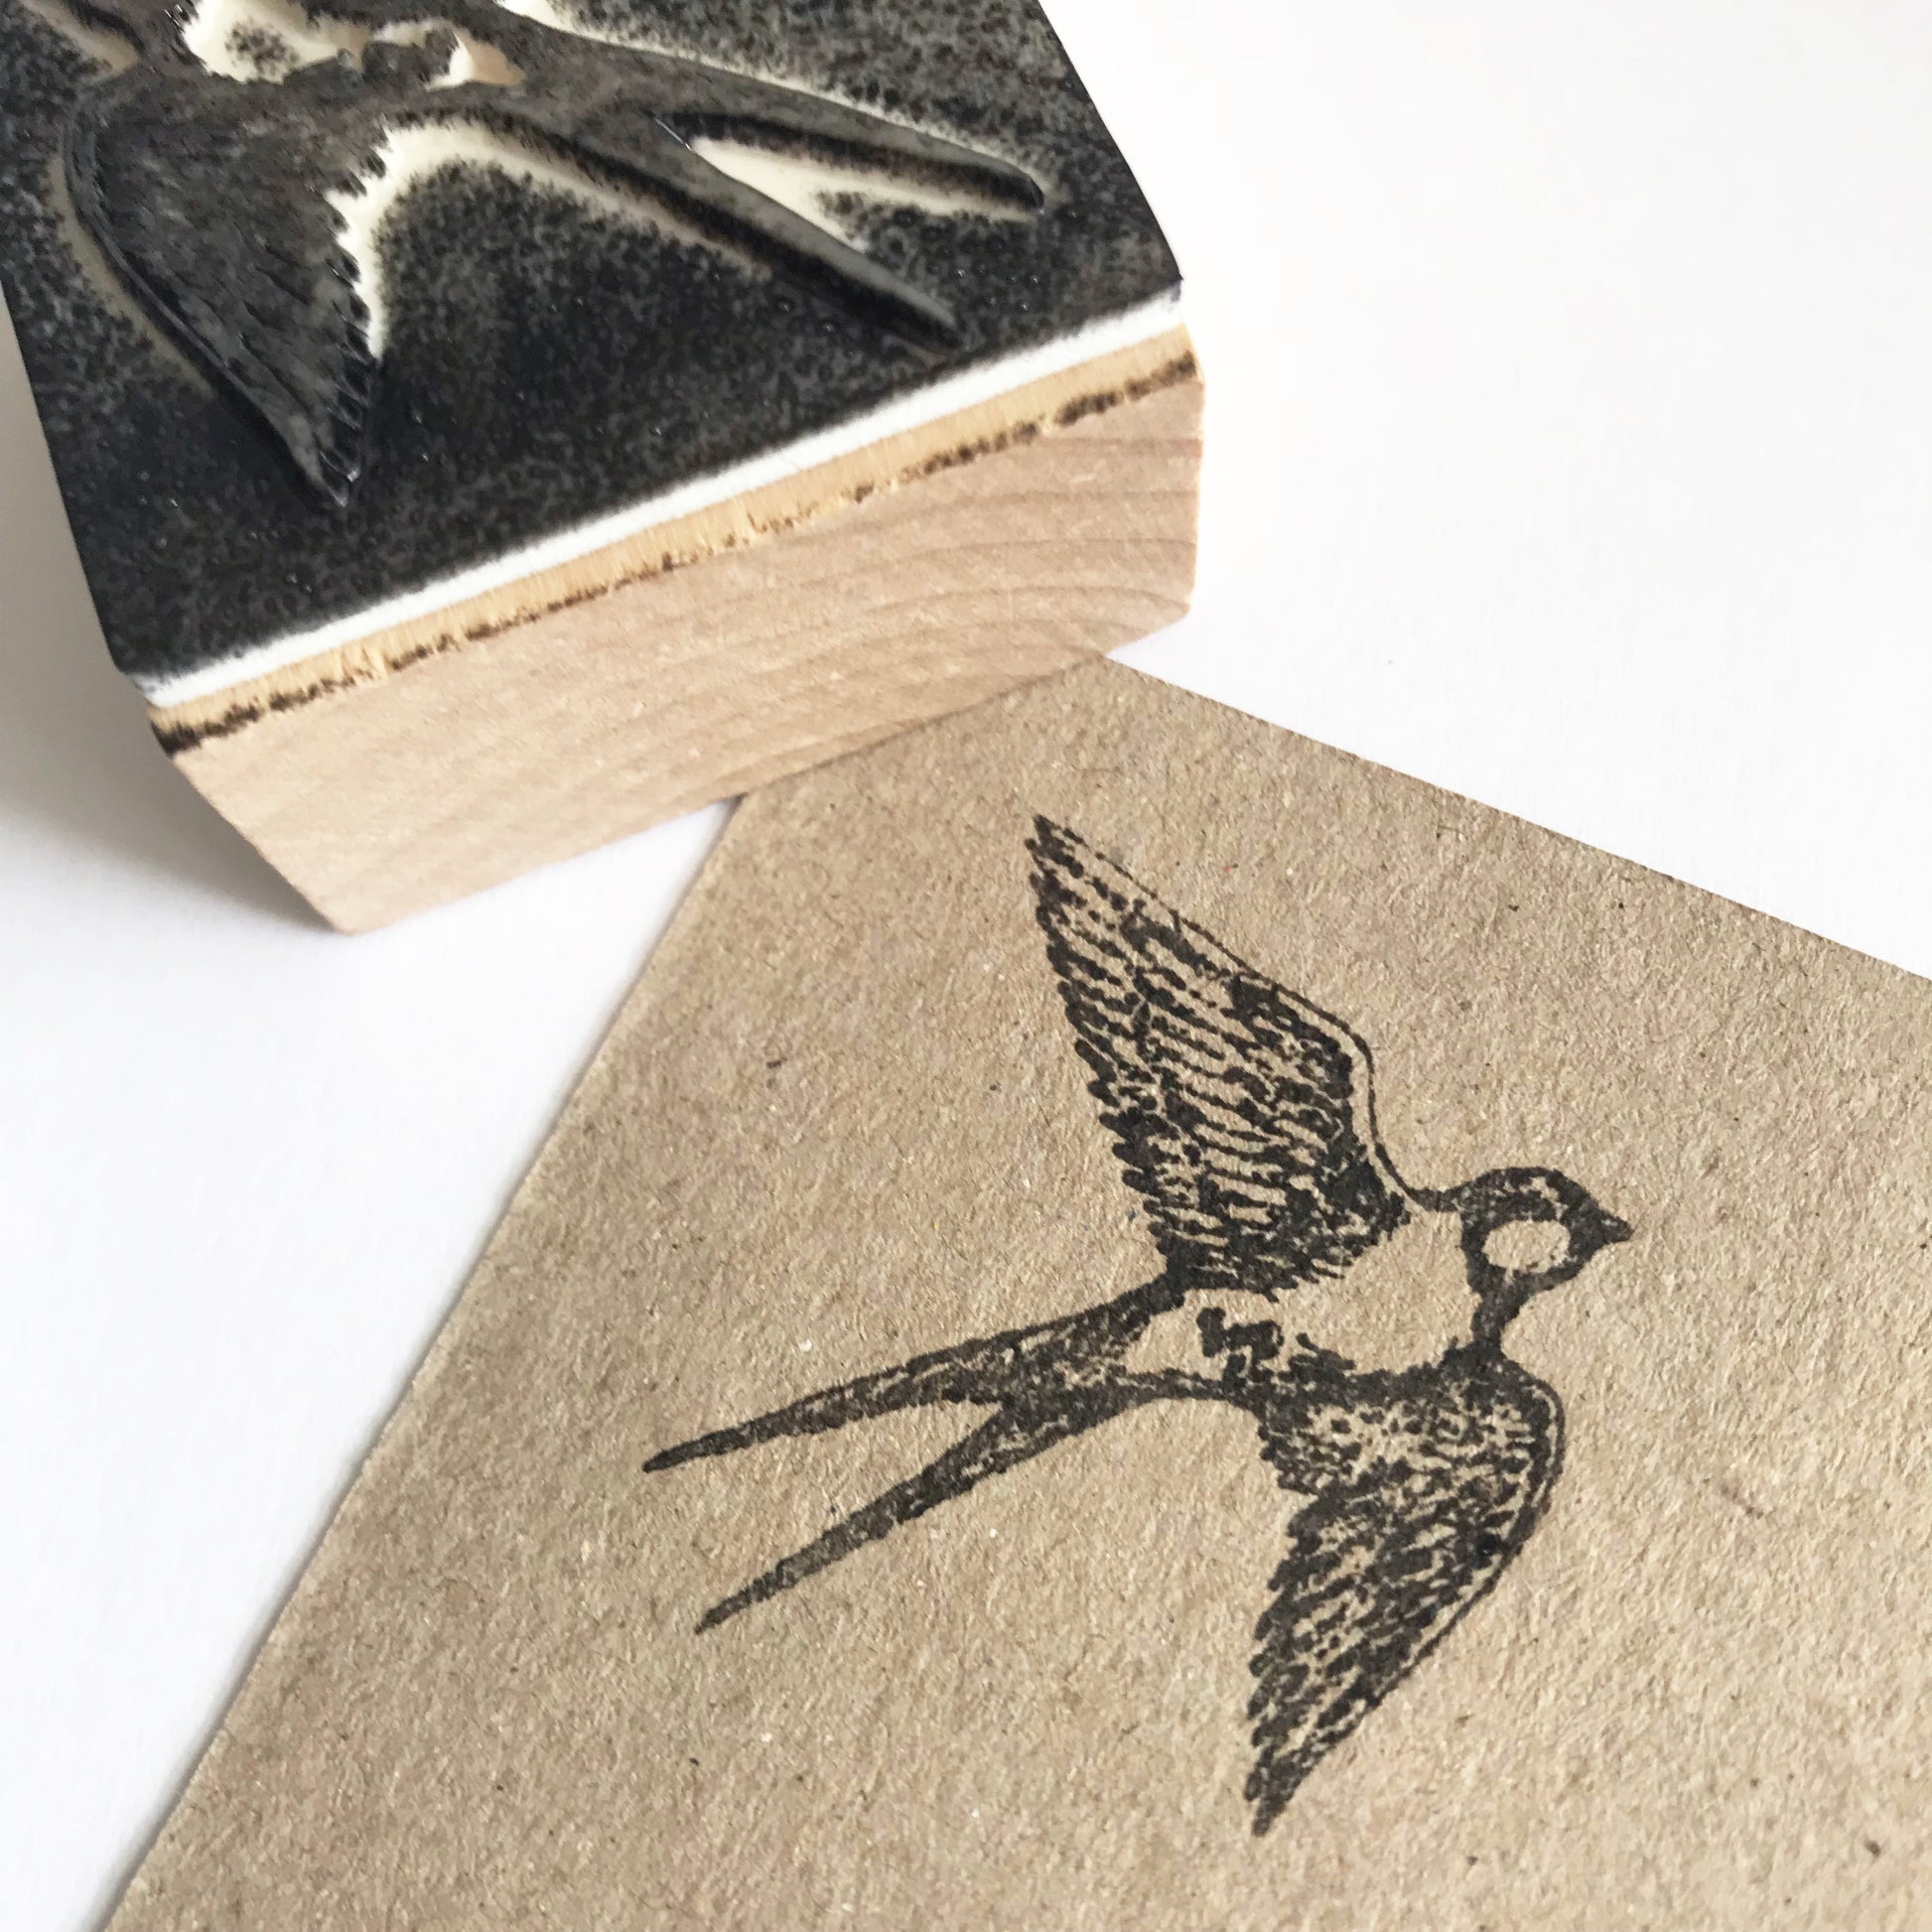 Wooden Stamp - Bee or Swallow - Vintage Rubber Stamps Cards Crafts Tags Stamping - SweetpeaStore